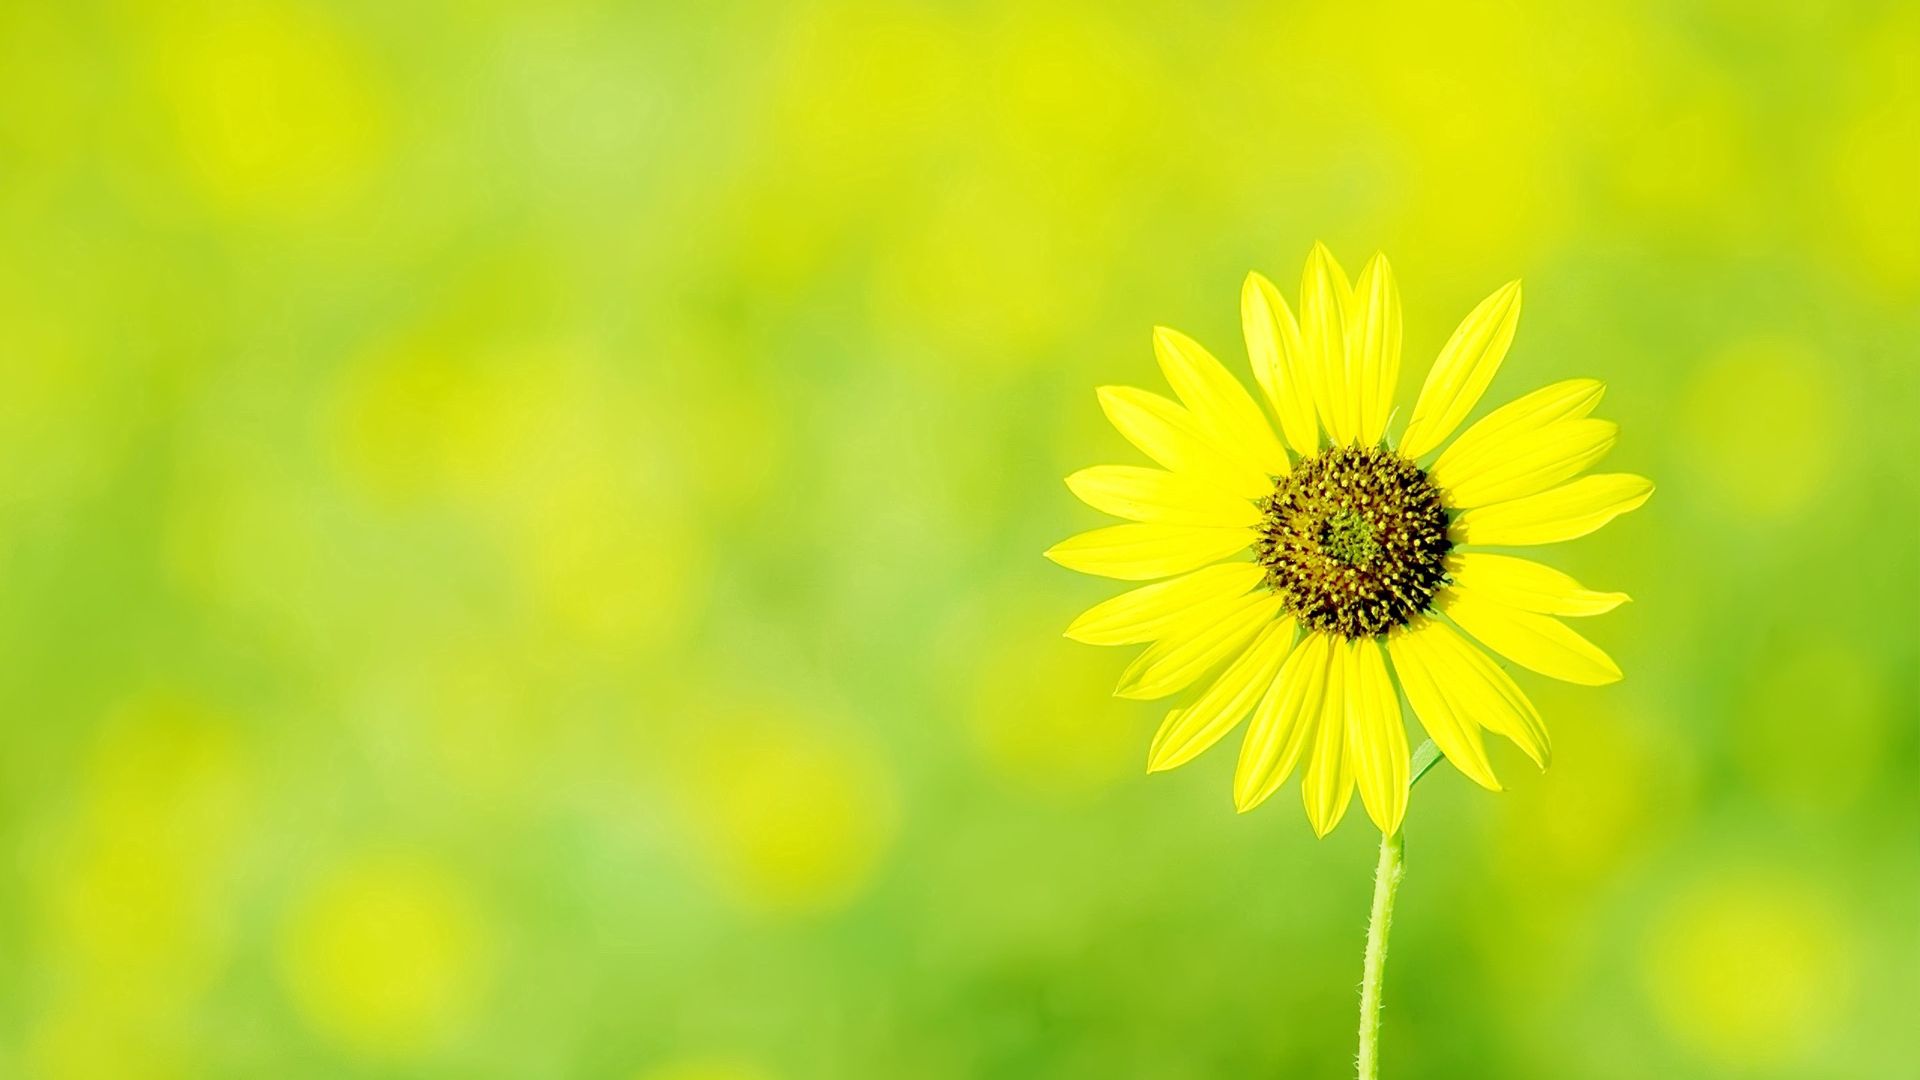 Download wallpaper 1920x1080 small, green, flower, yellow full hd, hdtv,  fhd, 1080p hd background